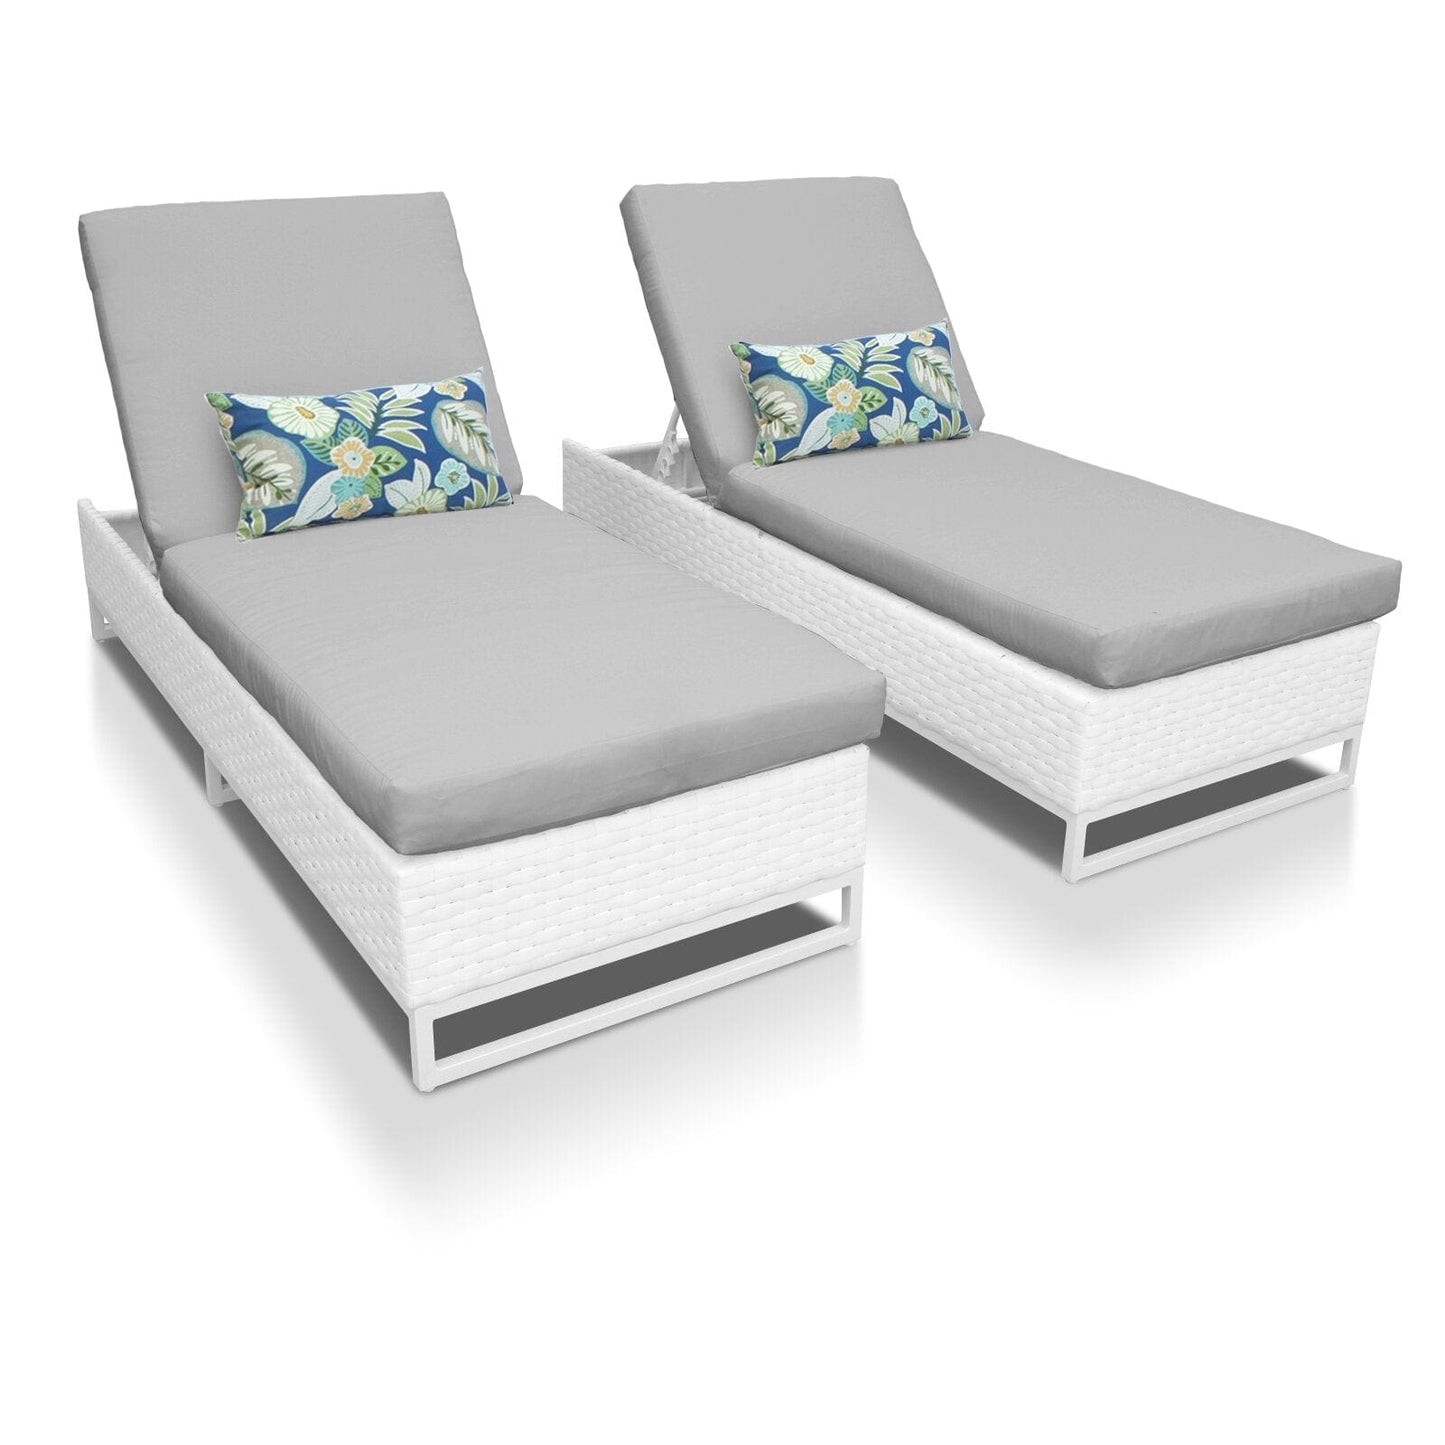 Dreamline Outdoor Furniture Poolside Lounger With Cushions (White, Set of 2)